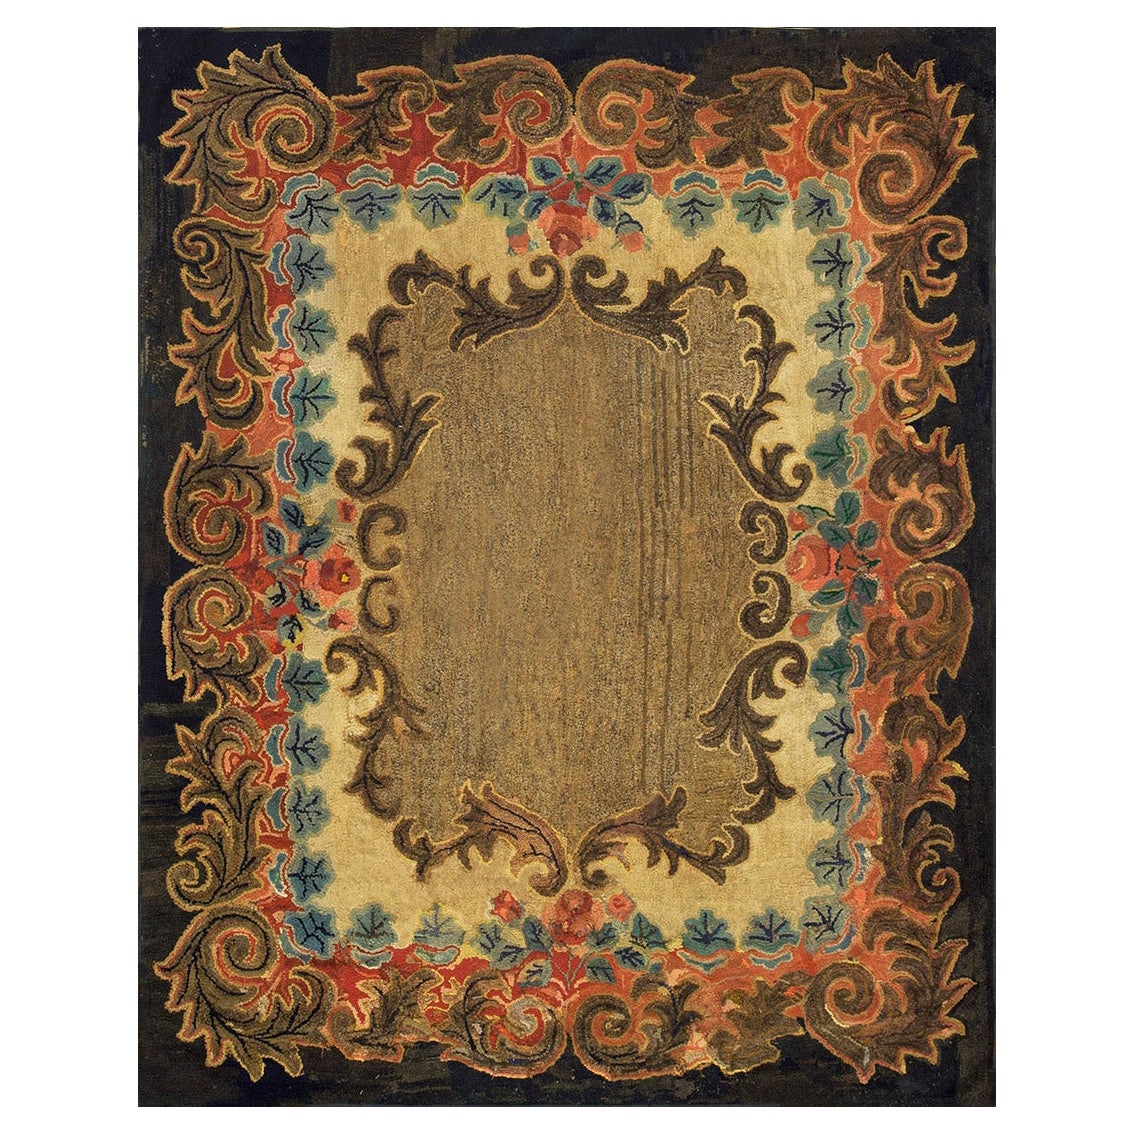 Late 19th Century American Hooked Rug  5' 9"x 7' 3" 